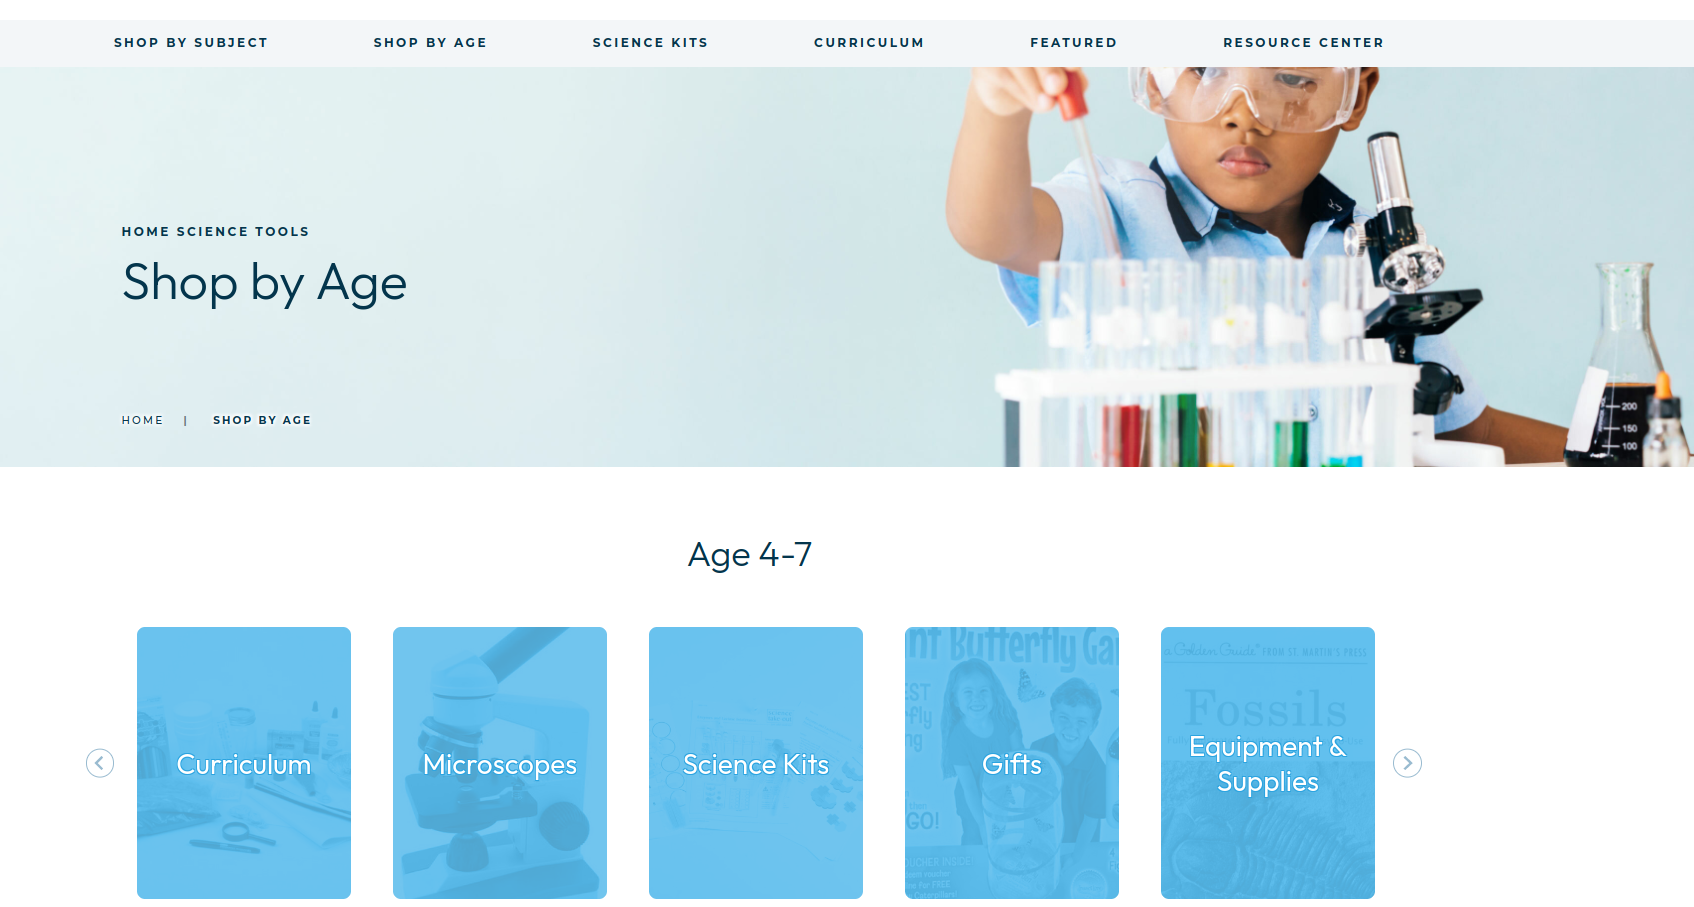 The Home Science Tools ecommerce website lets the user easily browse the products by age